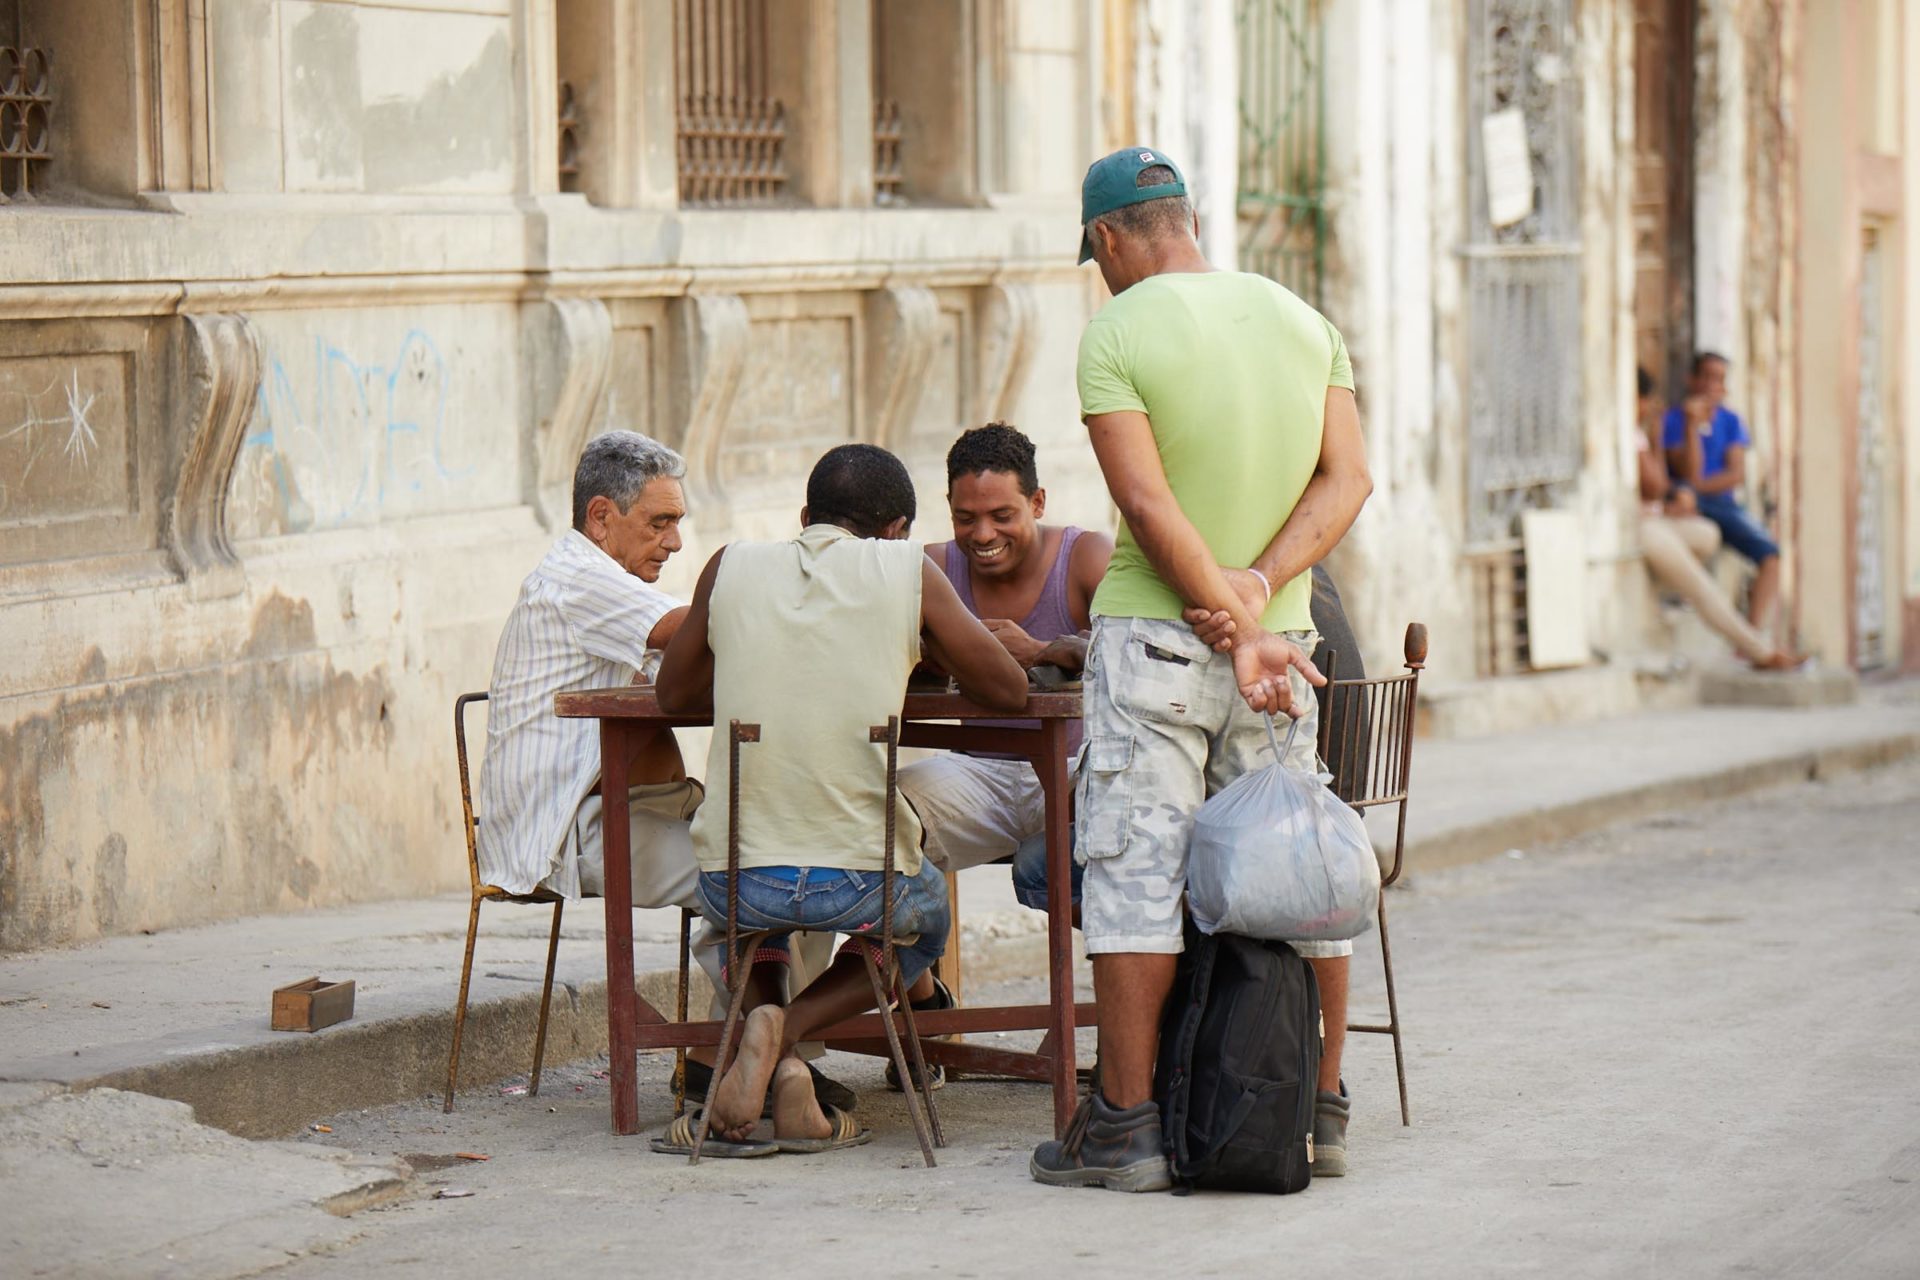 Transportation In Cuba: How To Get Around Safely